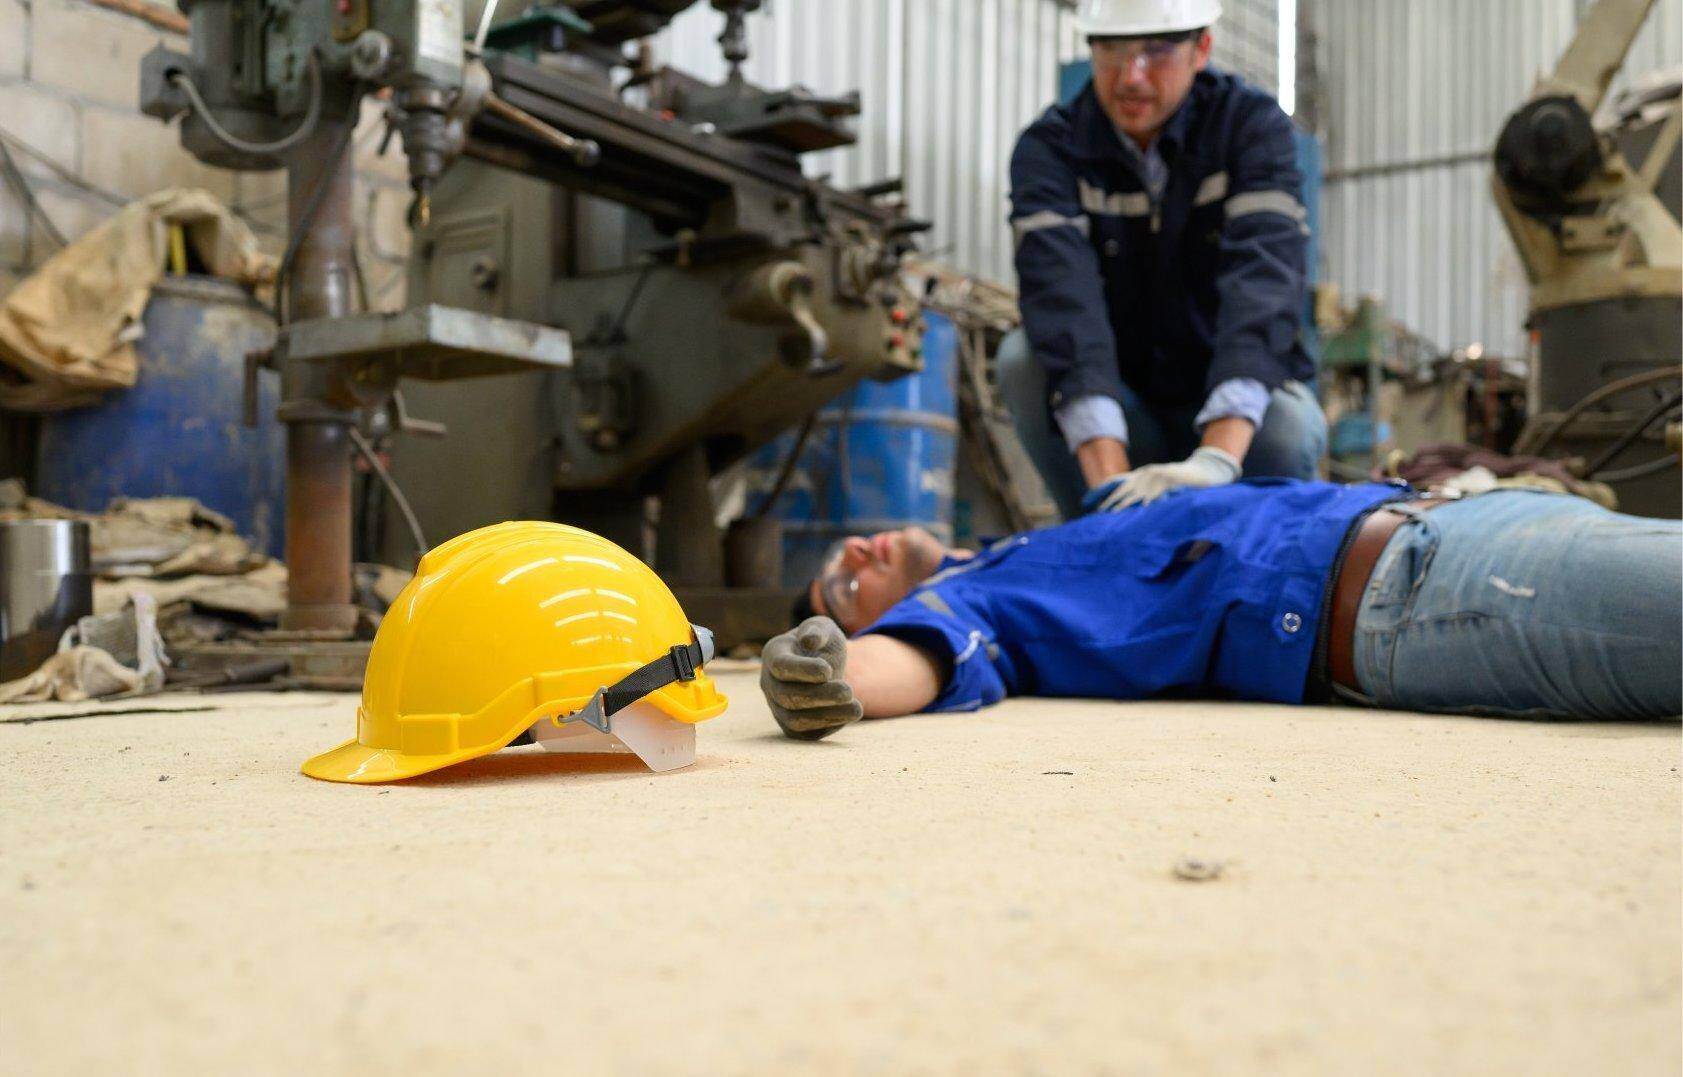 An unconscious man who has been injured on the job who will file for workers compensation in Belvedere Park, Georgia